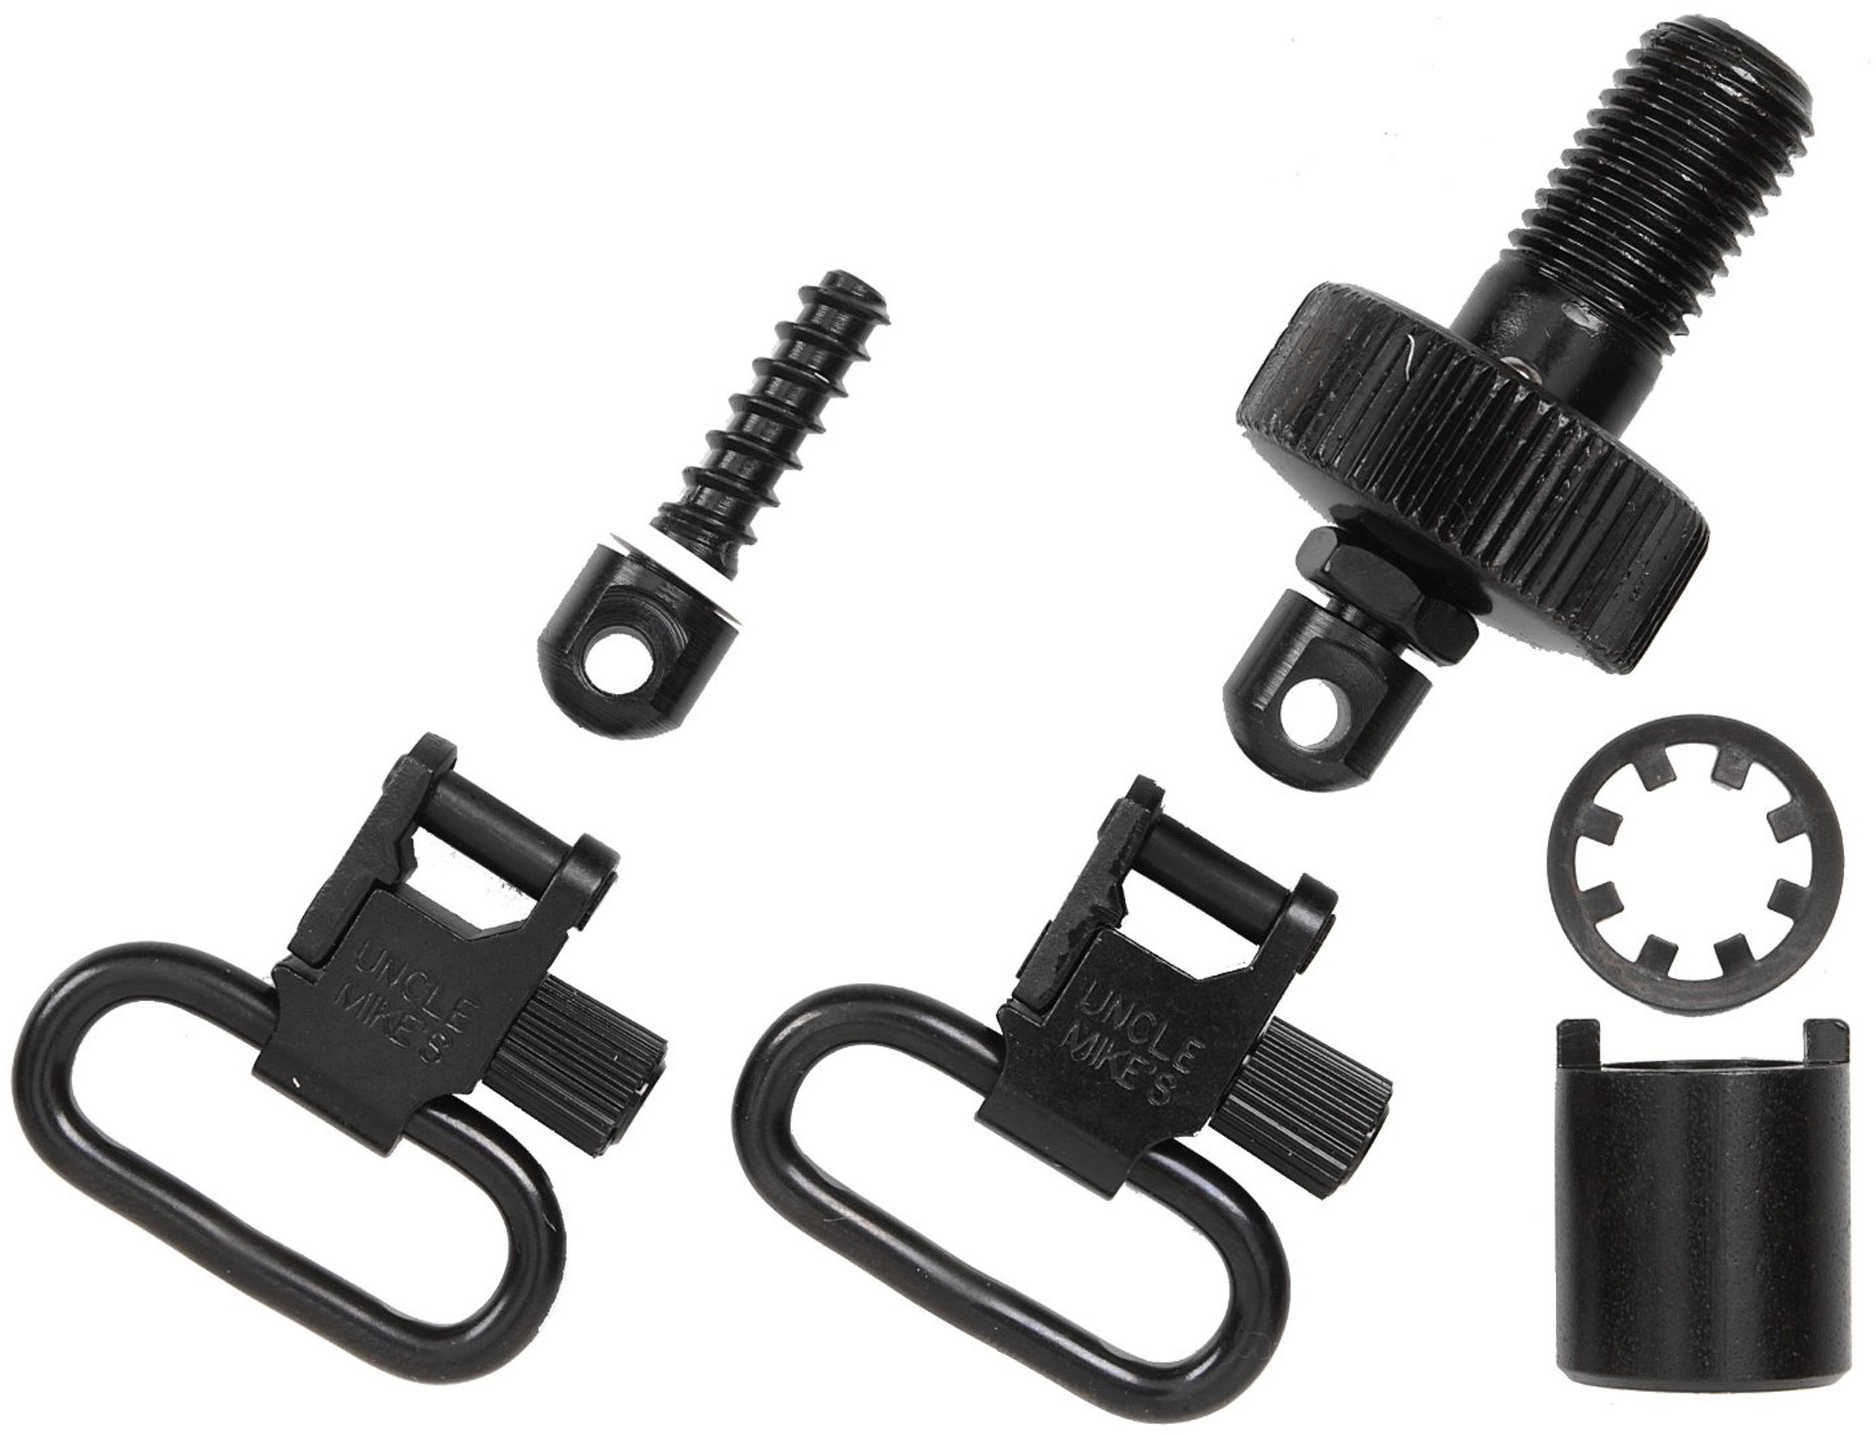 Uncle Mikes Magazine Cap Swivel Set For Mossberg 500 12 Gauge Md: 18102